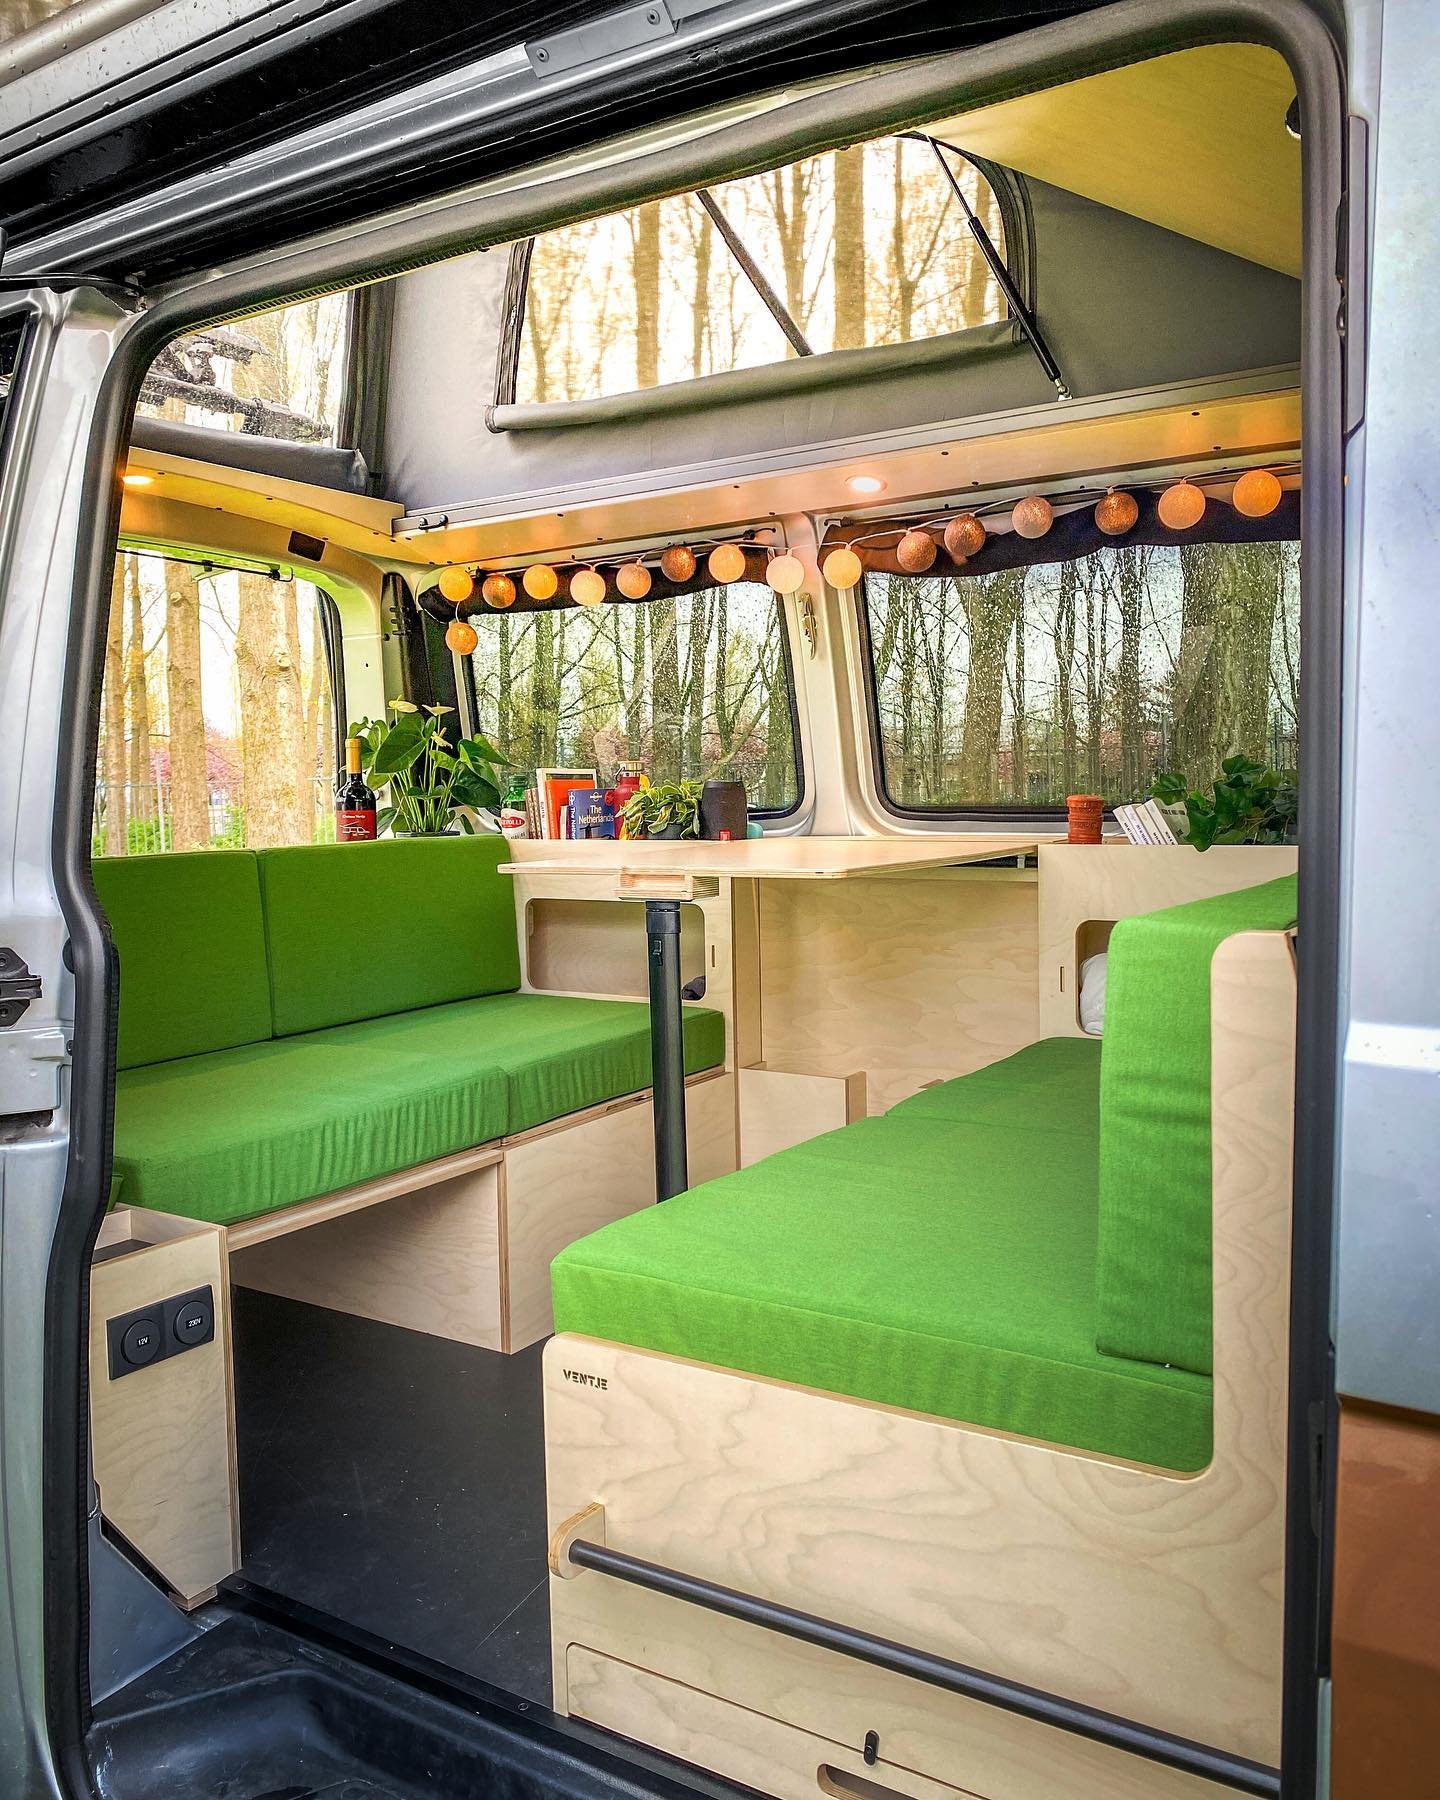 Ventje Campers Are IKEA-Style Gadgets on Wheels, Built for the New